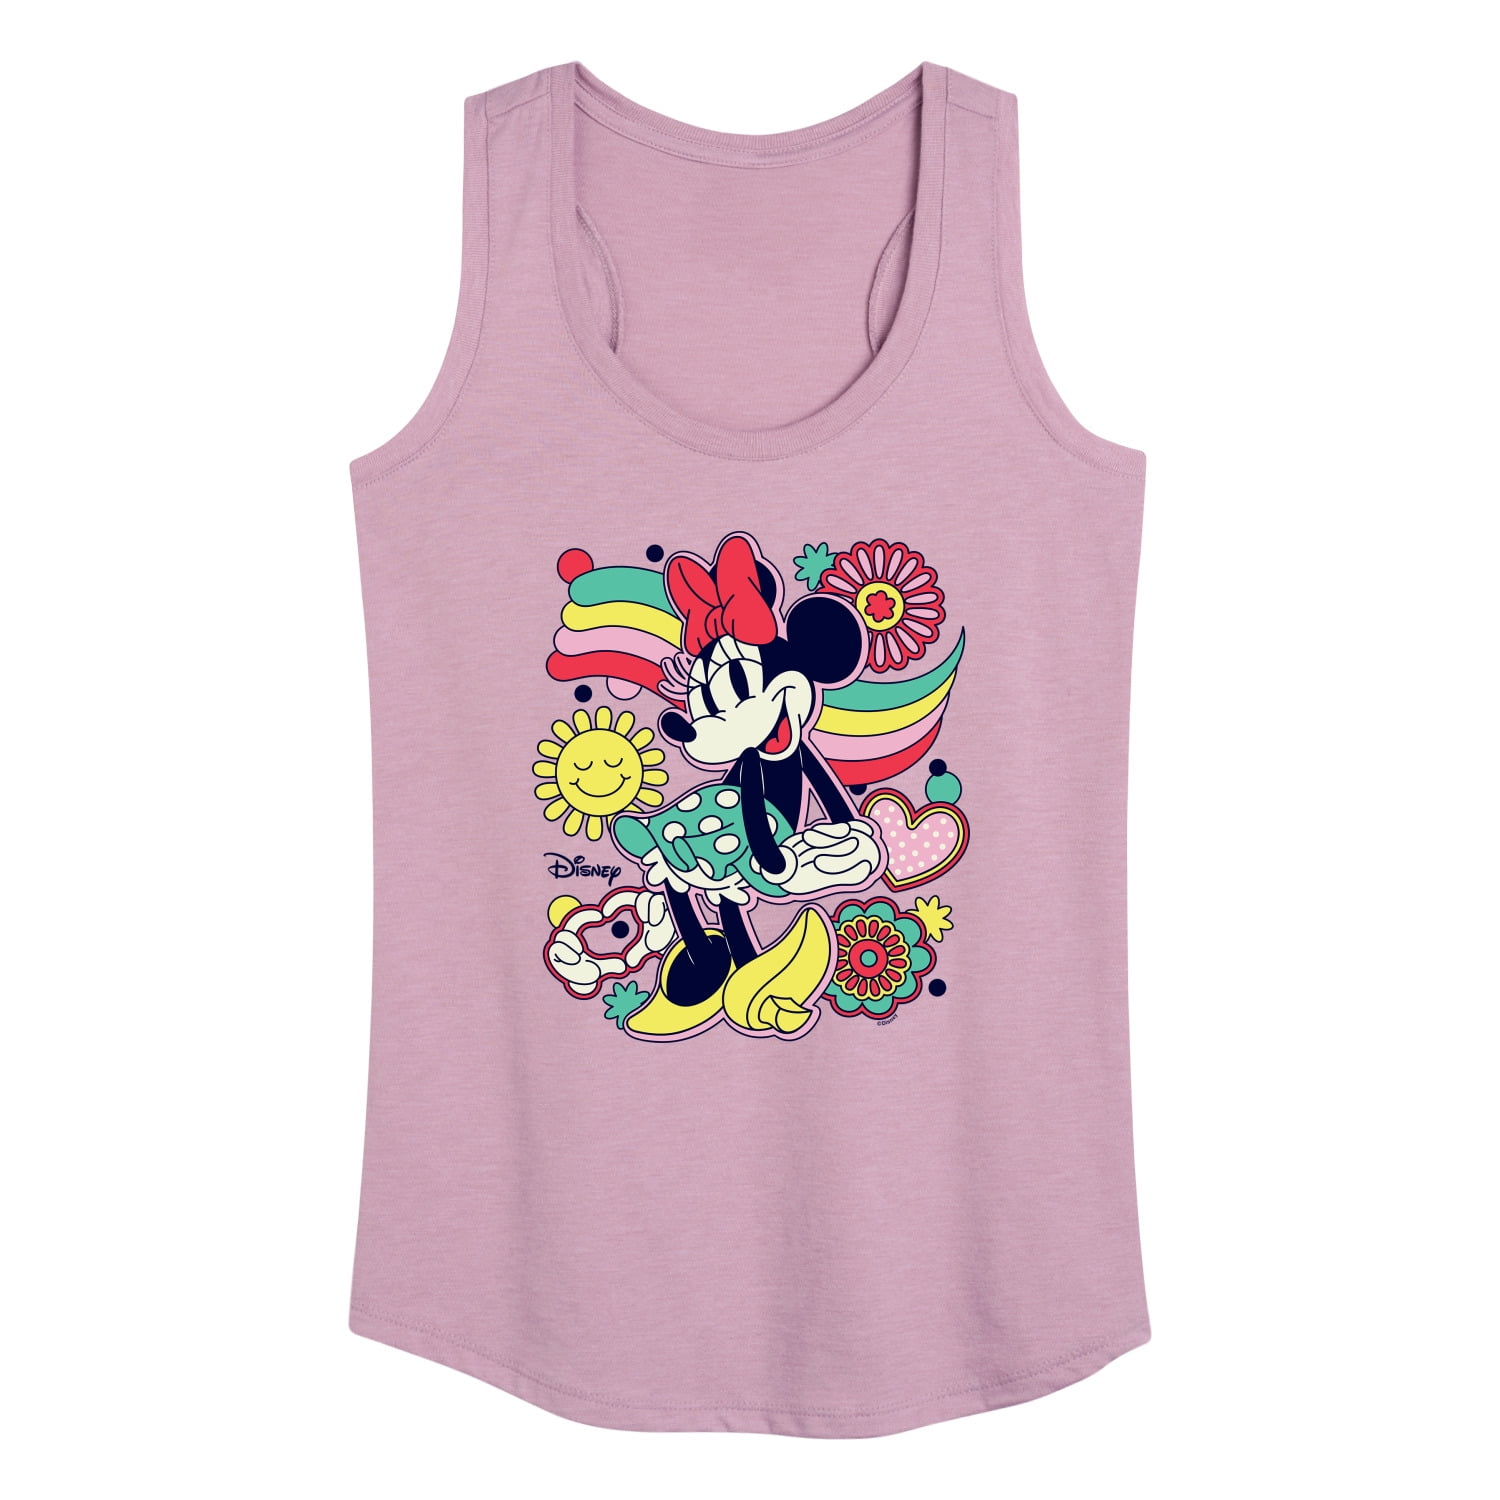 Disney Mickey Mouse & Minnie Mouse The Lovers Girls Tank Top - YELLOW